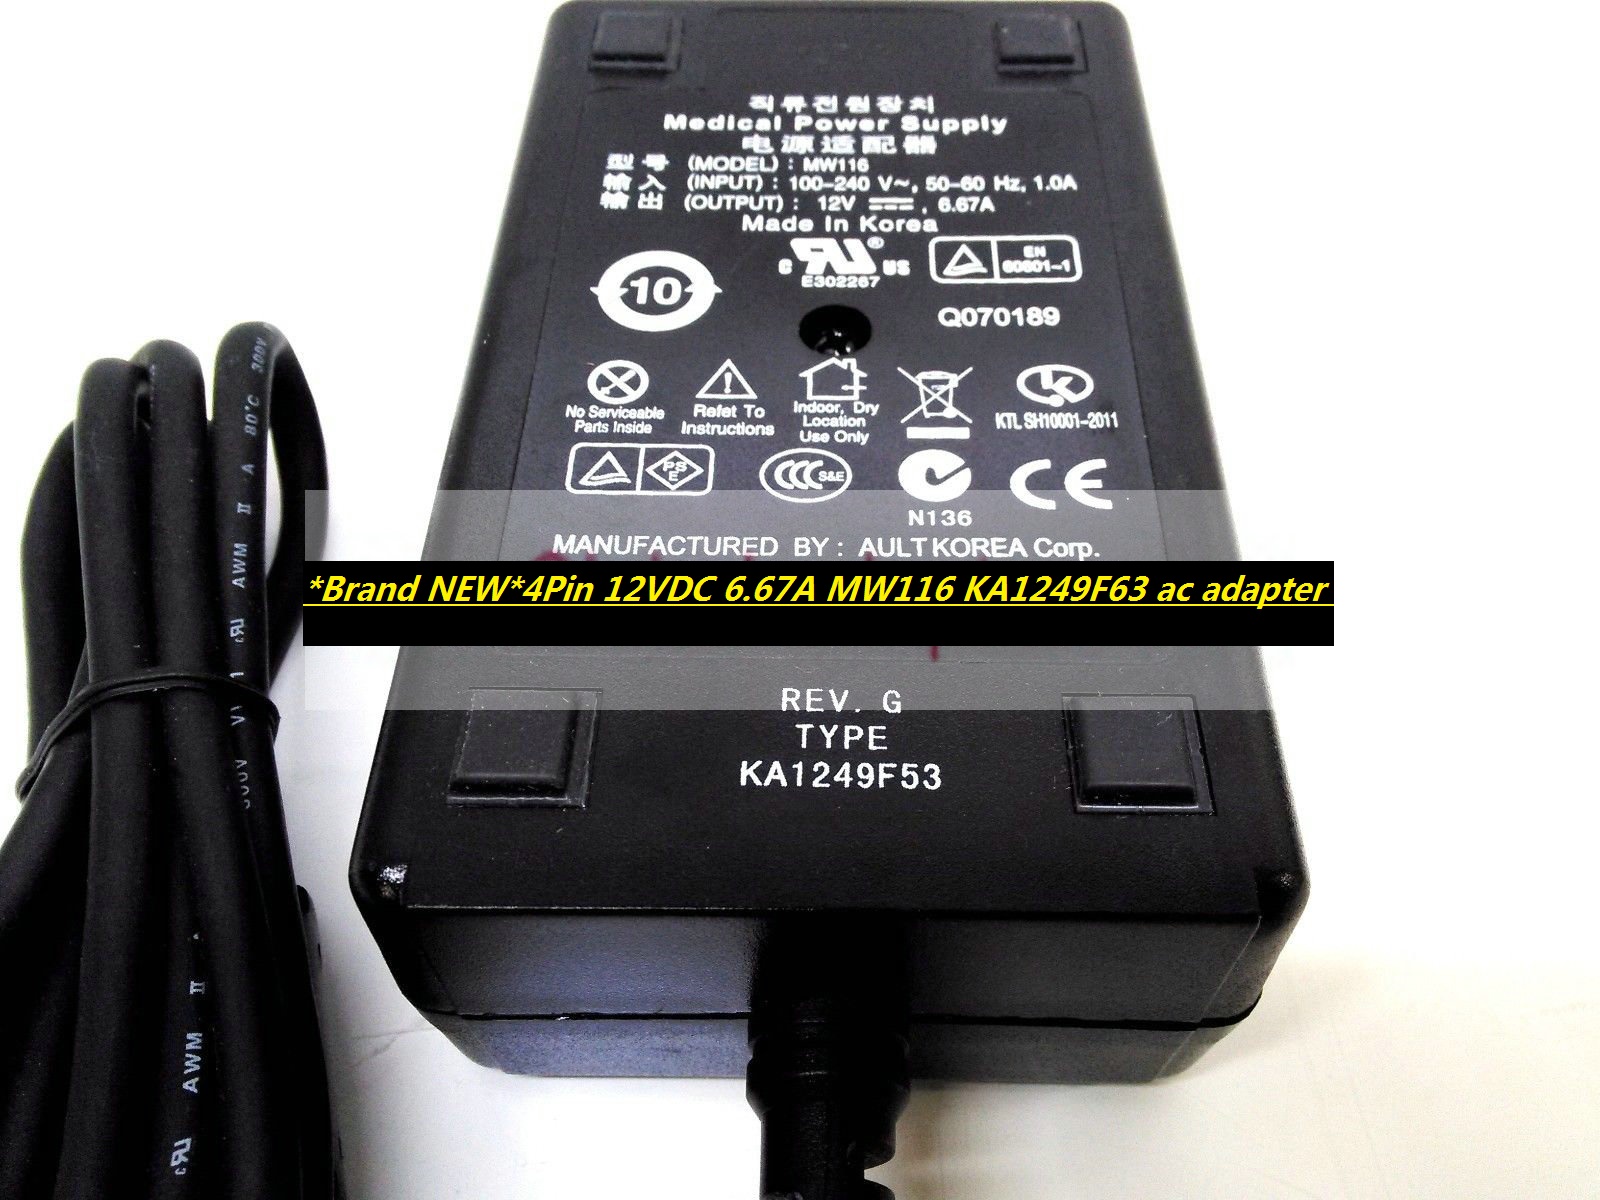 *Brand NEW*for X-Ray Viewer, I.T.E.Power Supply 4Pin 12VDC 6.67A MW116 KA1249F63 ac adapter